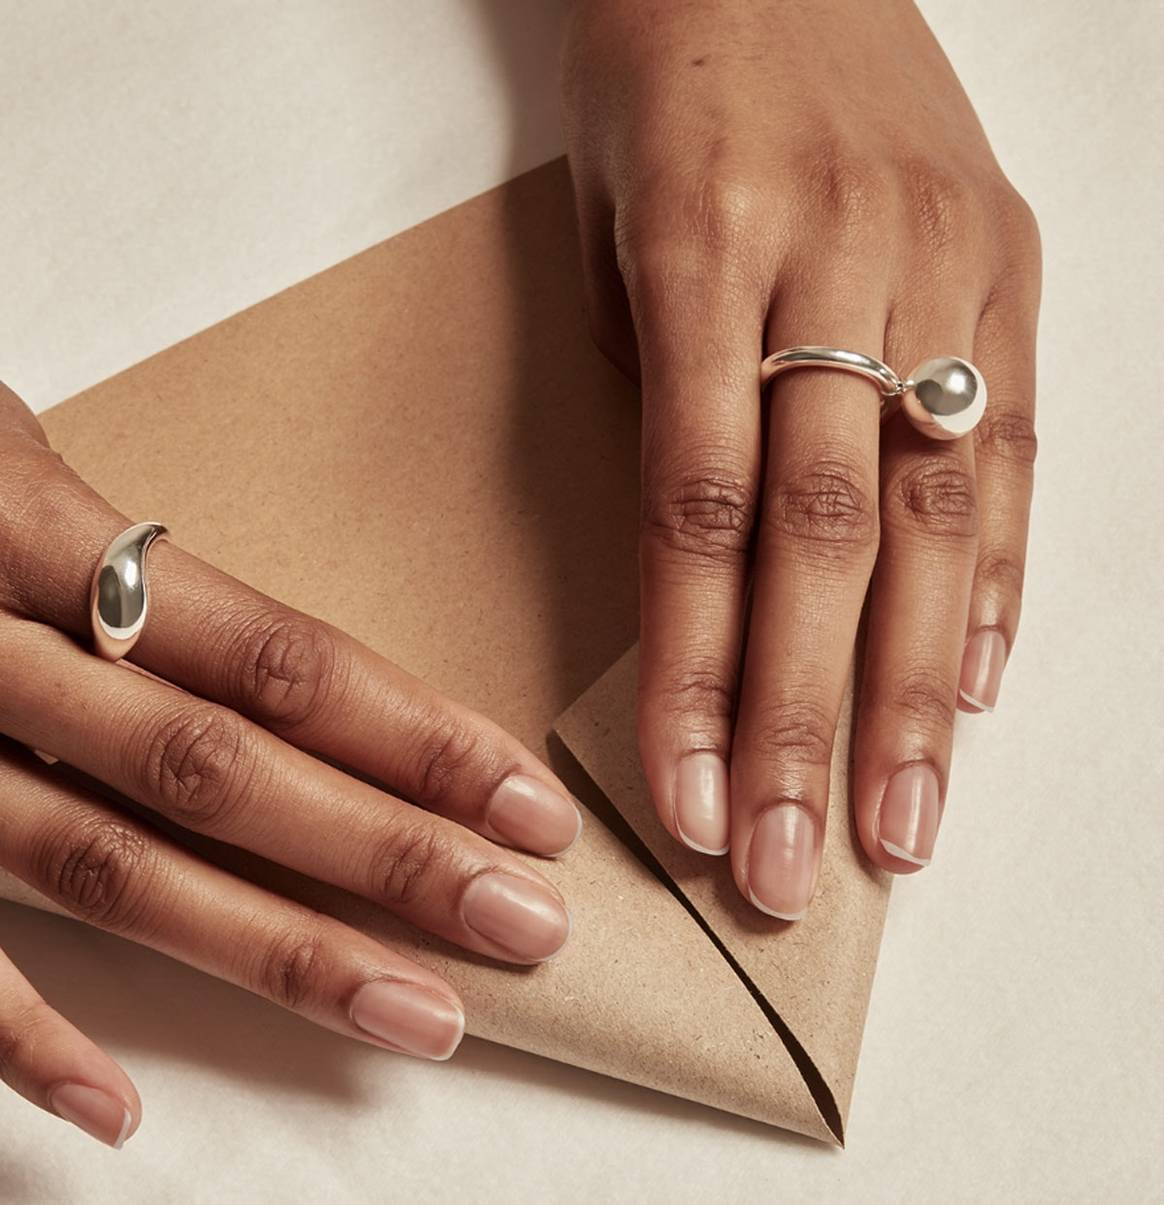 Cos launches new jewelry collection featuring recycled silver